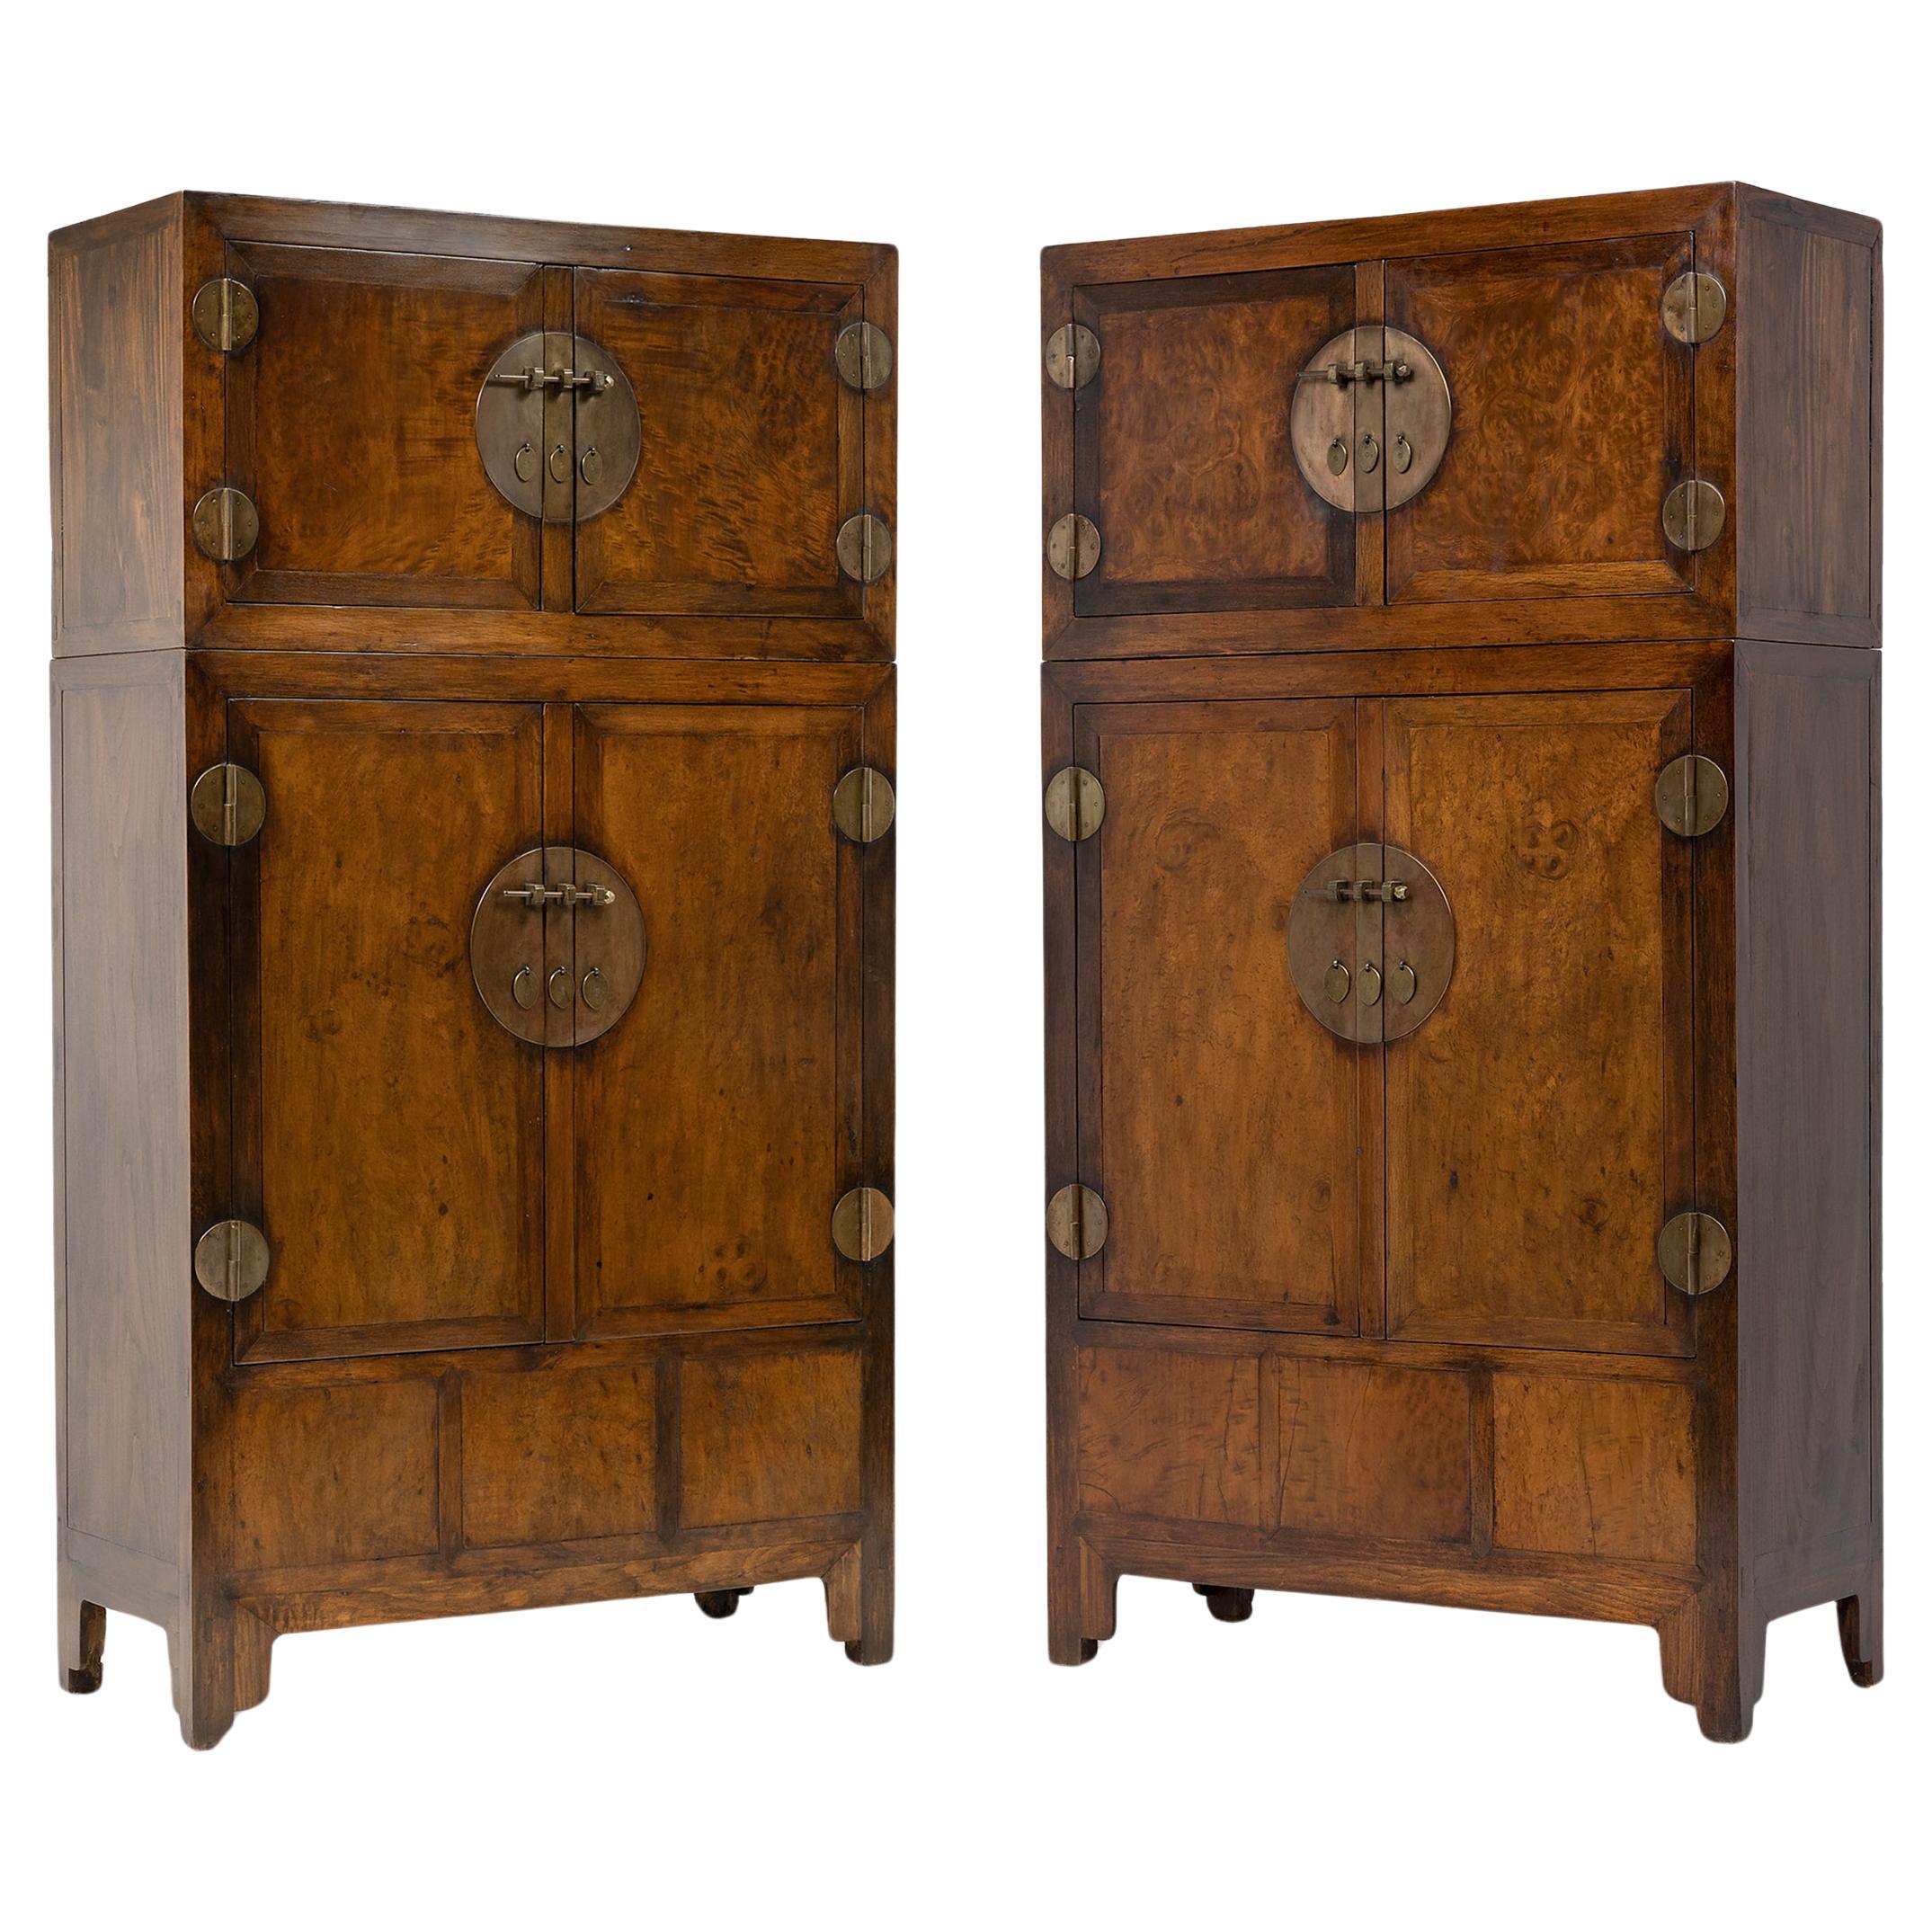 Pair of Chinese Camphor Burl Compound Cabinets, c. 1850